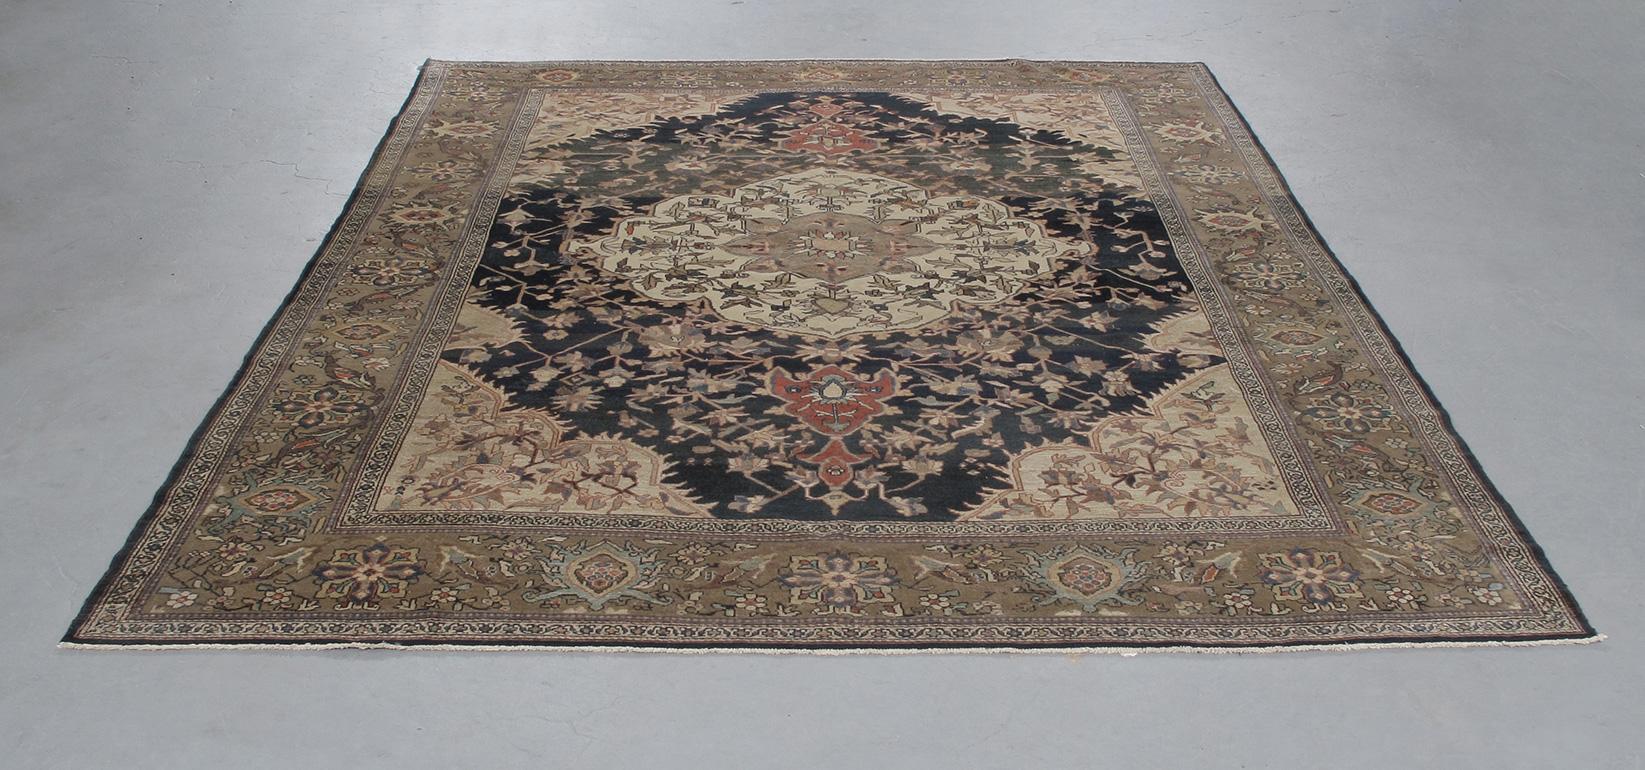 Circa 1900, this Antique Malayer hand-knotted rug comes from the town of the same name. This area in Iran has a rich weaving culture dating back over a century with individual weavers crafting some of the finest hand-carded wool rugs made with